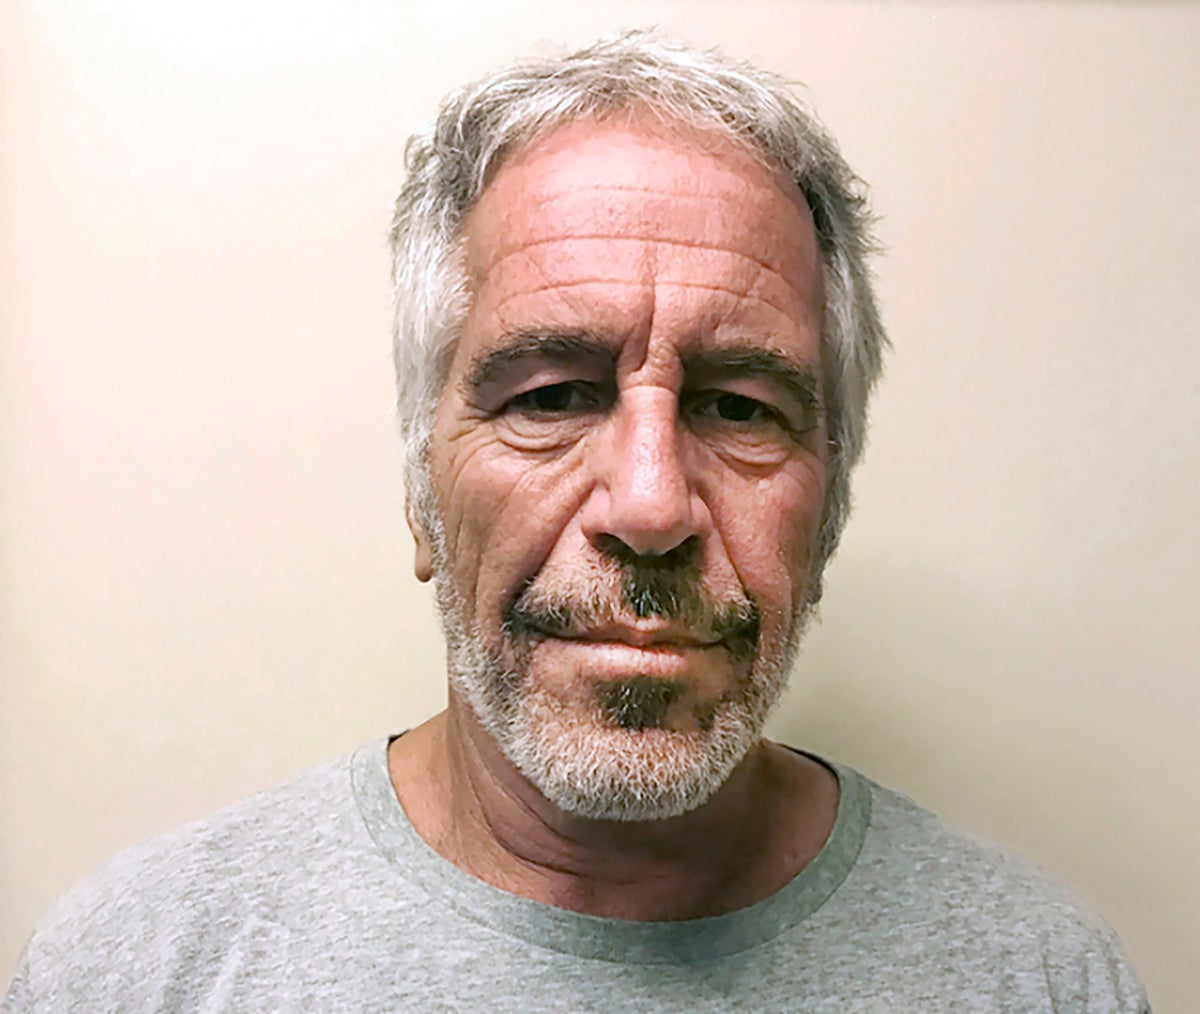 Multiple prison failures led to Jeffrey Epstein’s suicide, scathing watchdog report finds